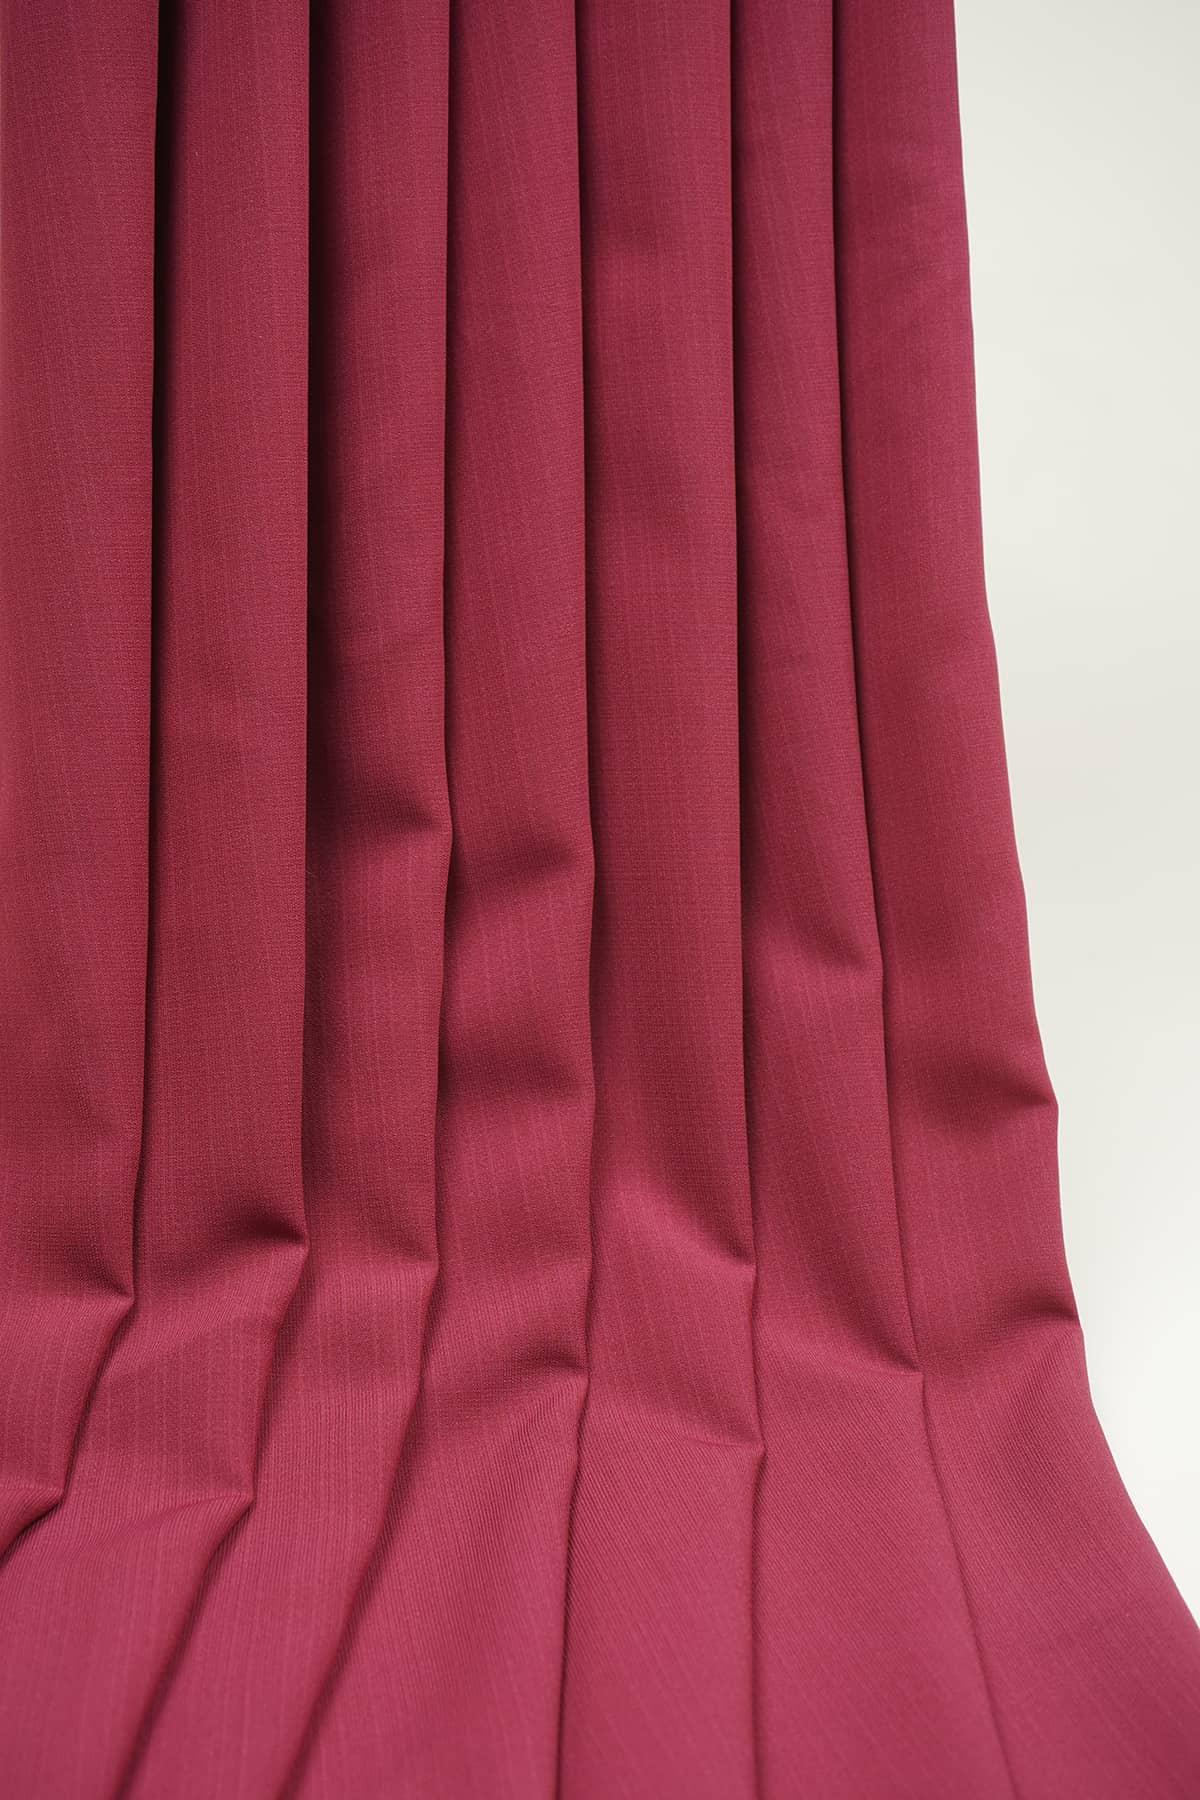 Plain Dyed Betty - saraaha.com - Casual, Casual Wear, Comfy Casual, comfy casuals, Formal Wear, Heavy Weight, Indo Western, Kurta, Long Dresses, Men Wear, Men's wear collection, Multiple Color Variety, One Pieces, Plain Dyed, Polyester, Shirt, Suits, western, Western Dresses, Women Wear